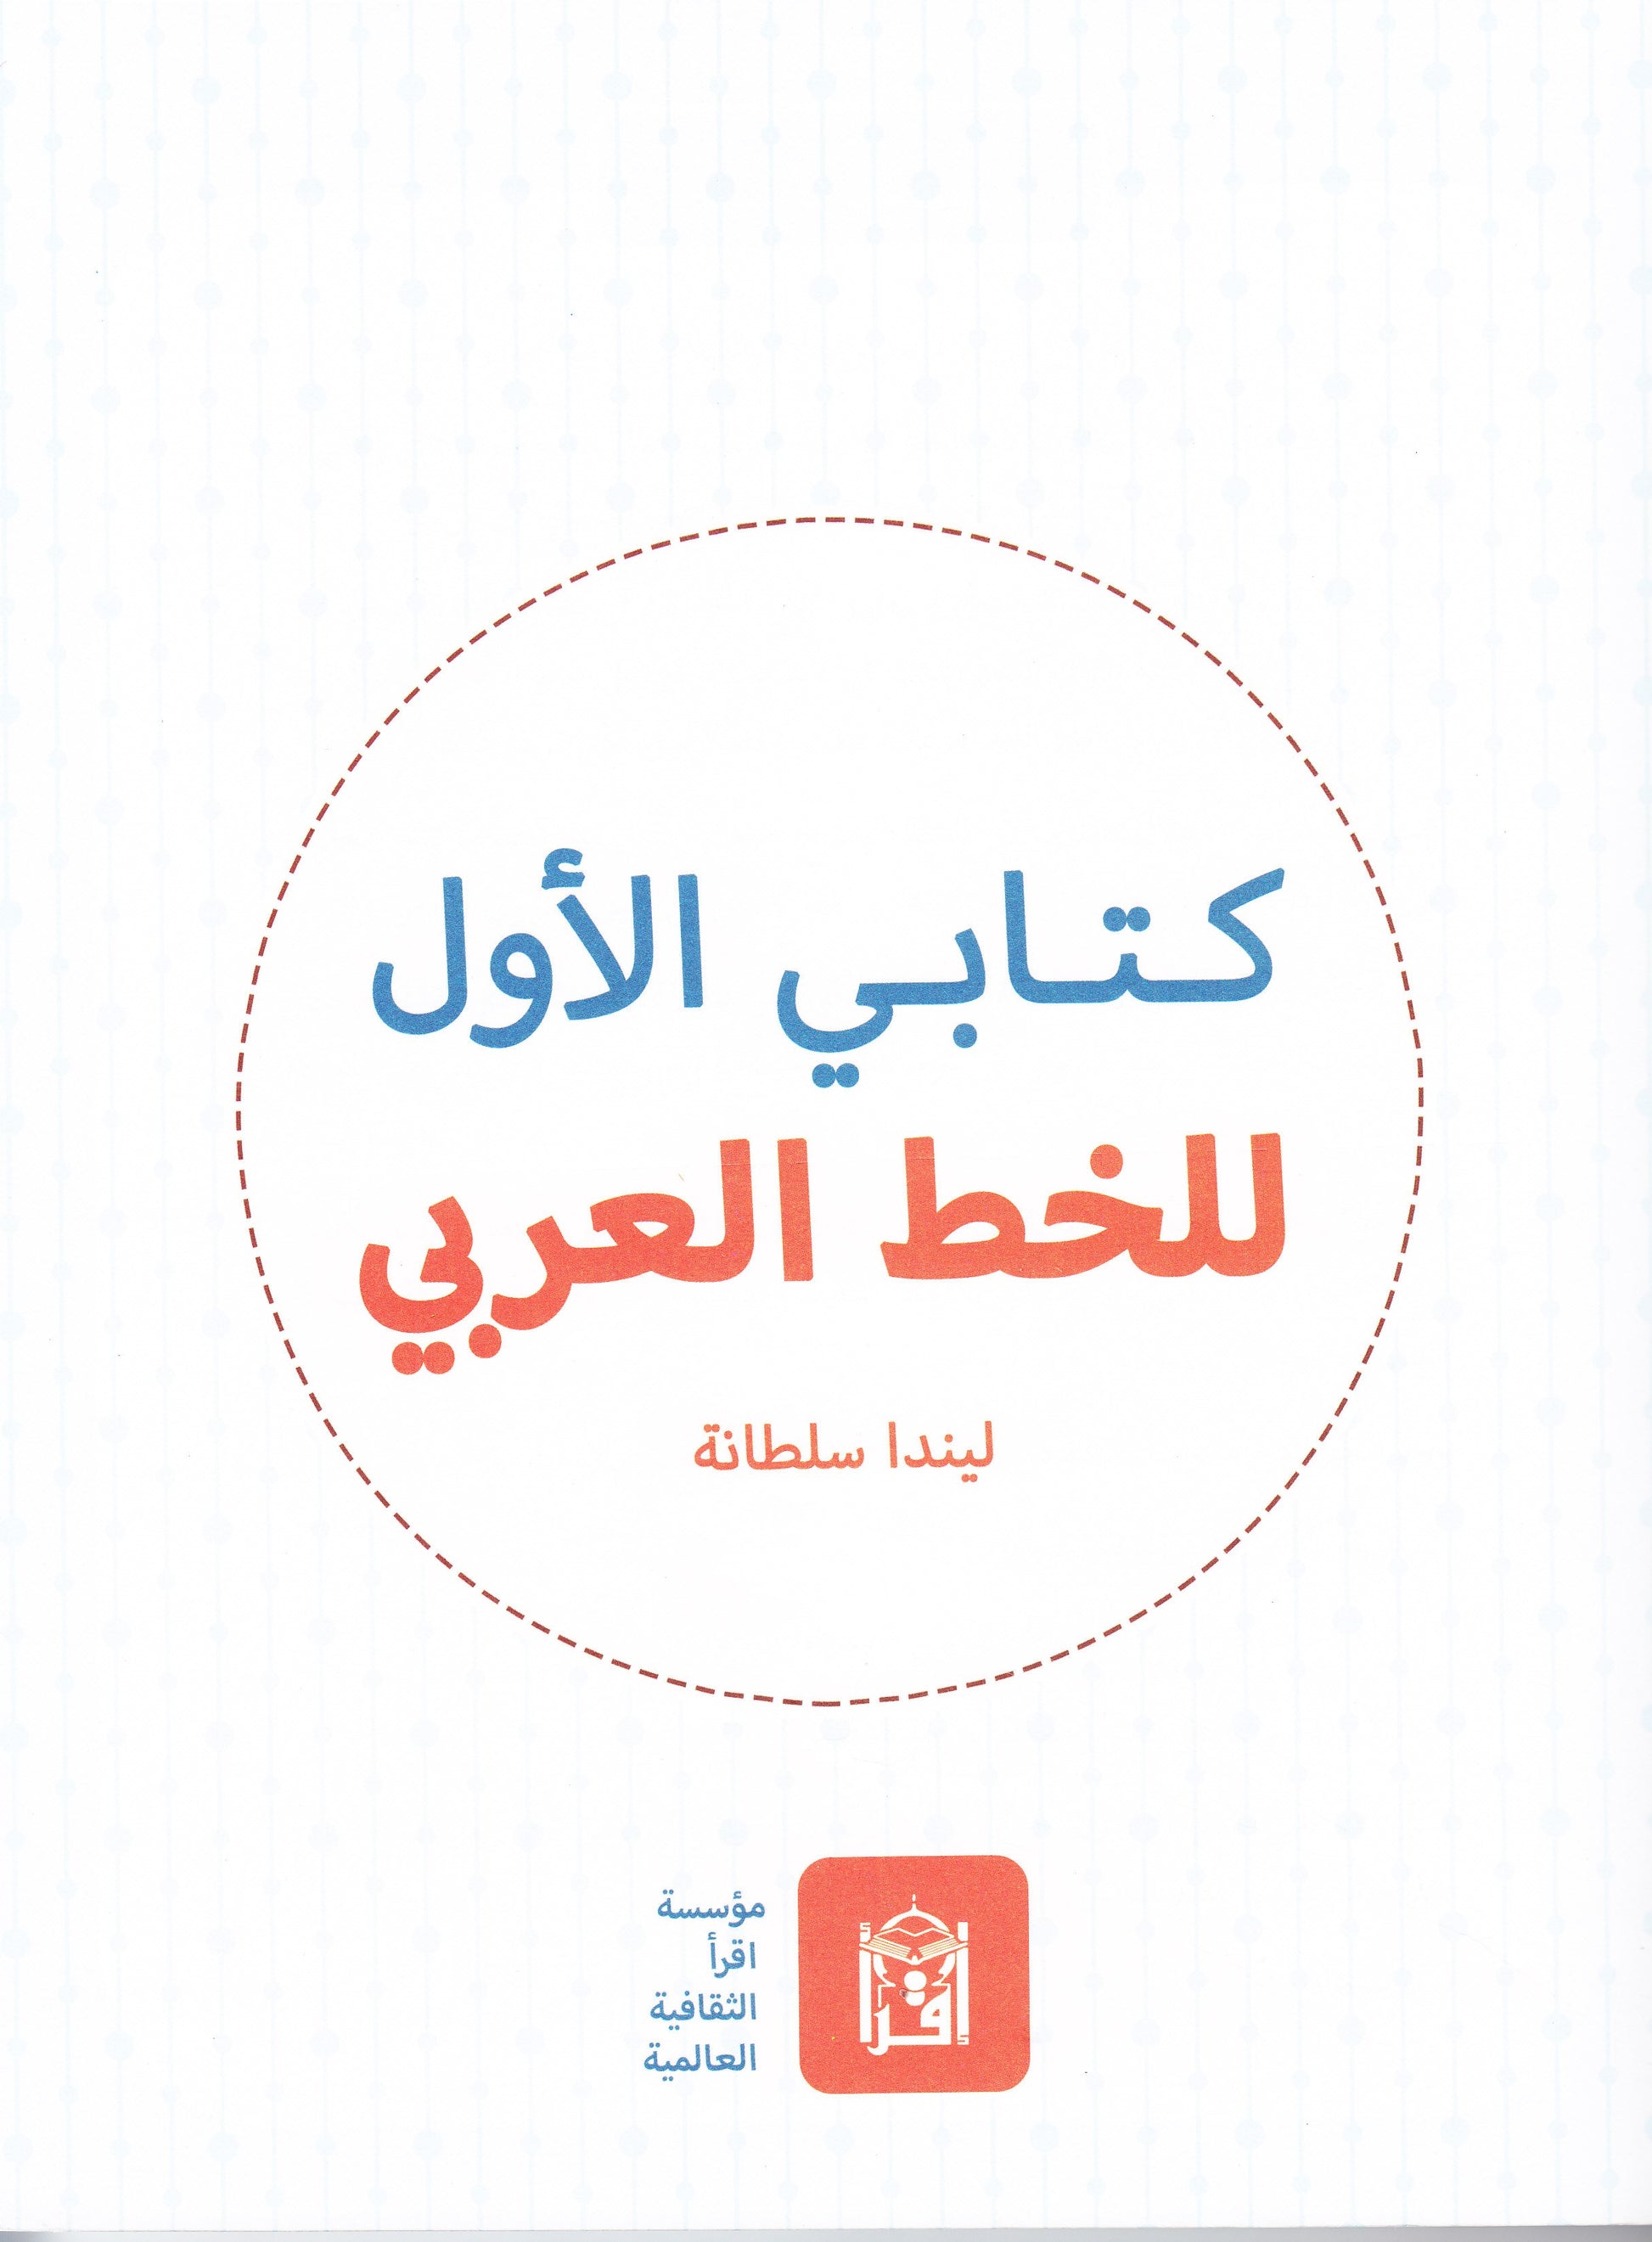 My First Book of Arabic Writing - Premium Workbook from IQRA' international Educational Foundation - Just $11! Shop now at IQRA' international Educational Foundation